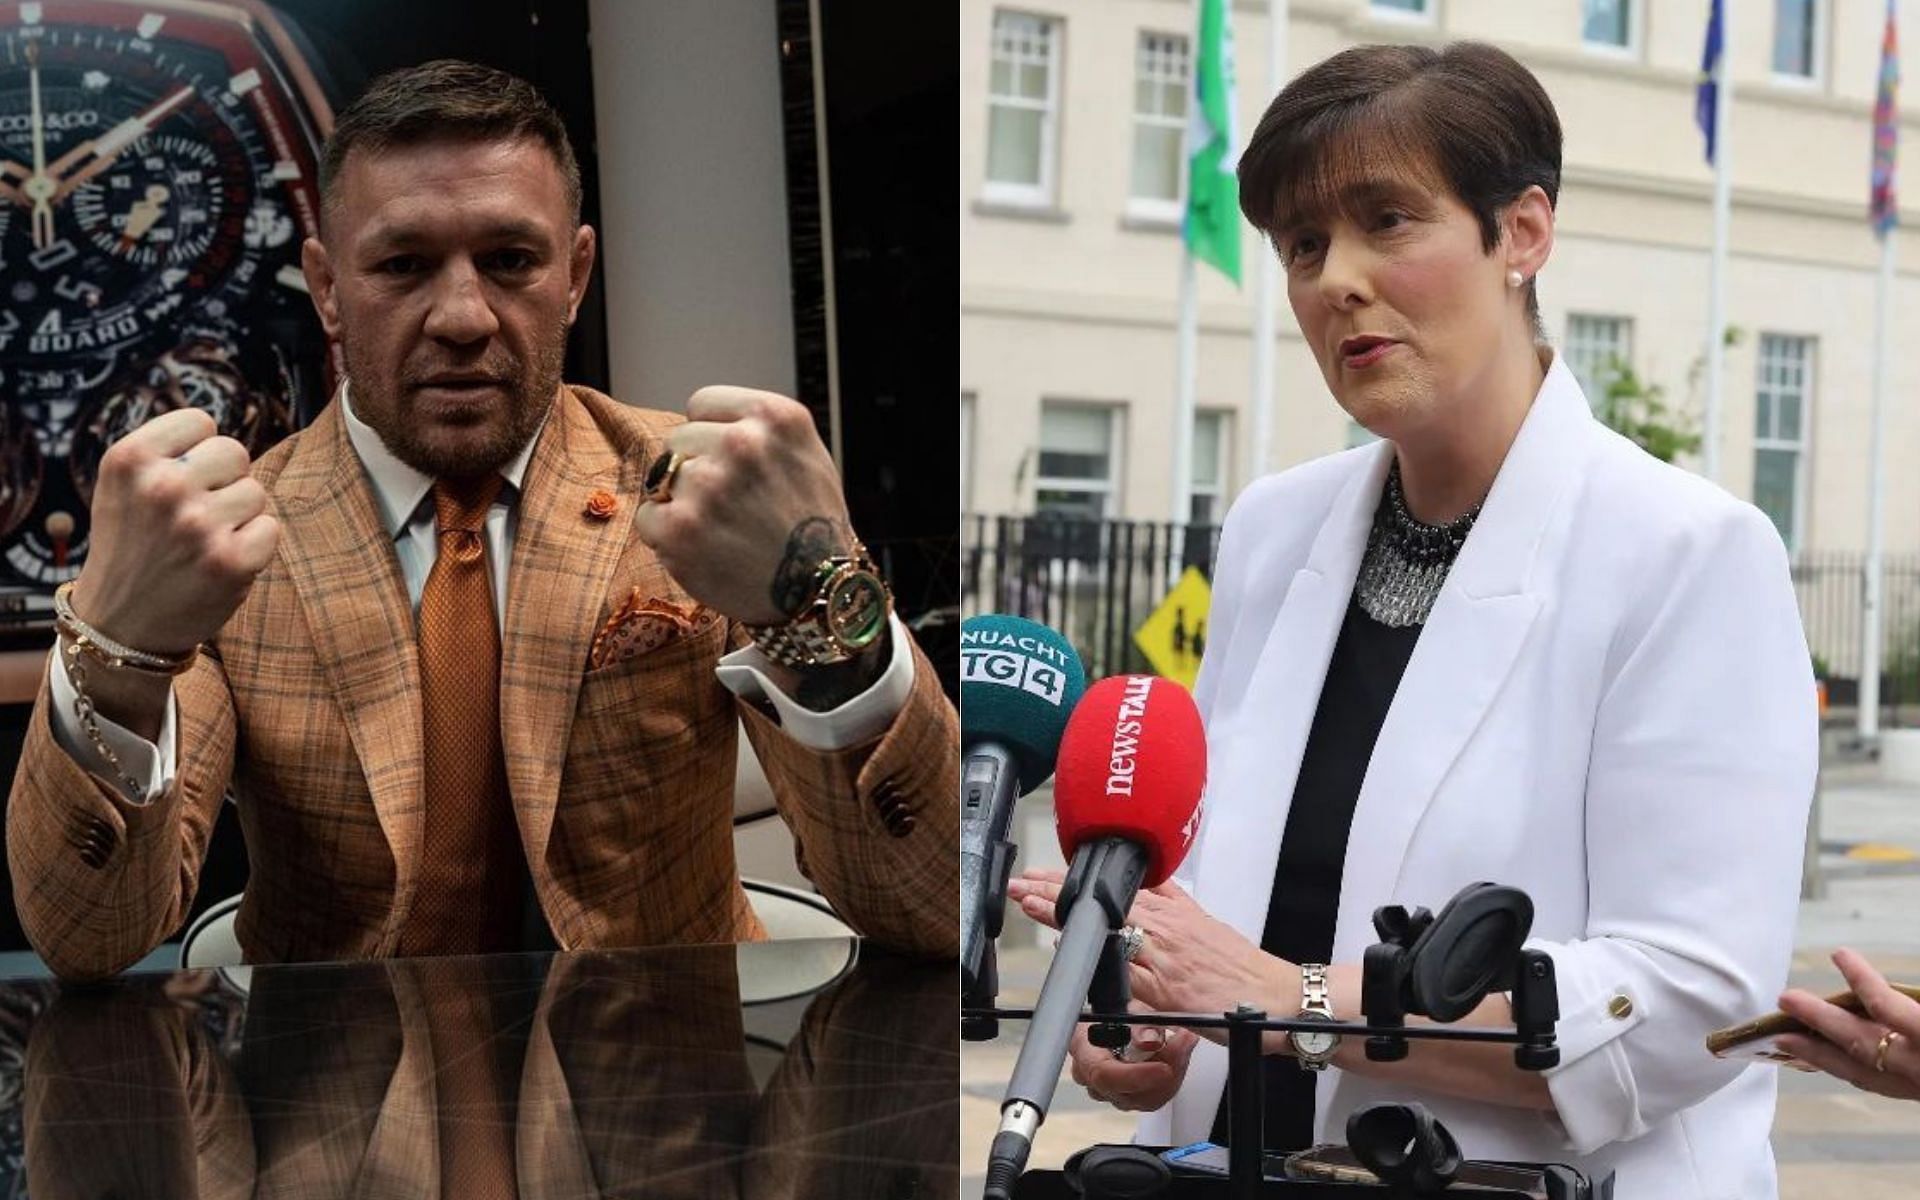 Conor McGregor (left) Norma Foley (right) [Image courtesy @thenotoriousmm @normafoleytd on Instagram]